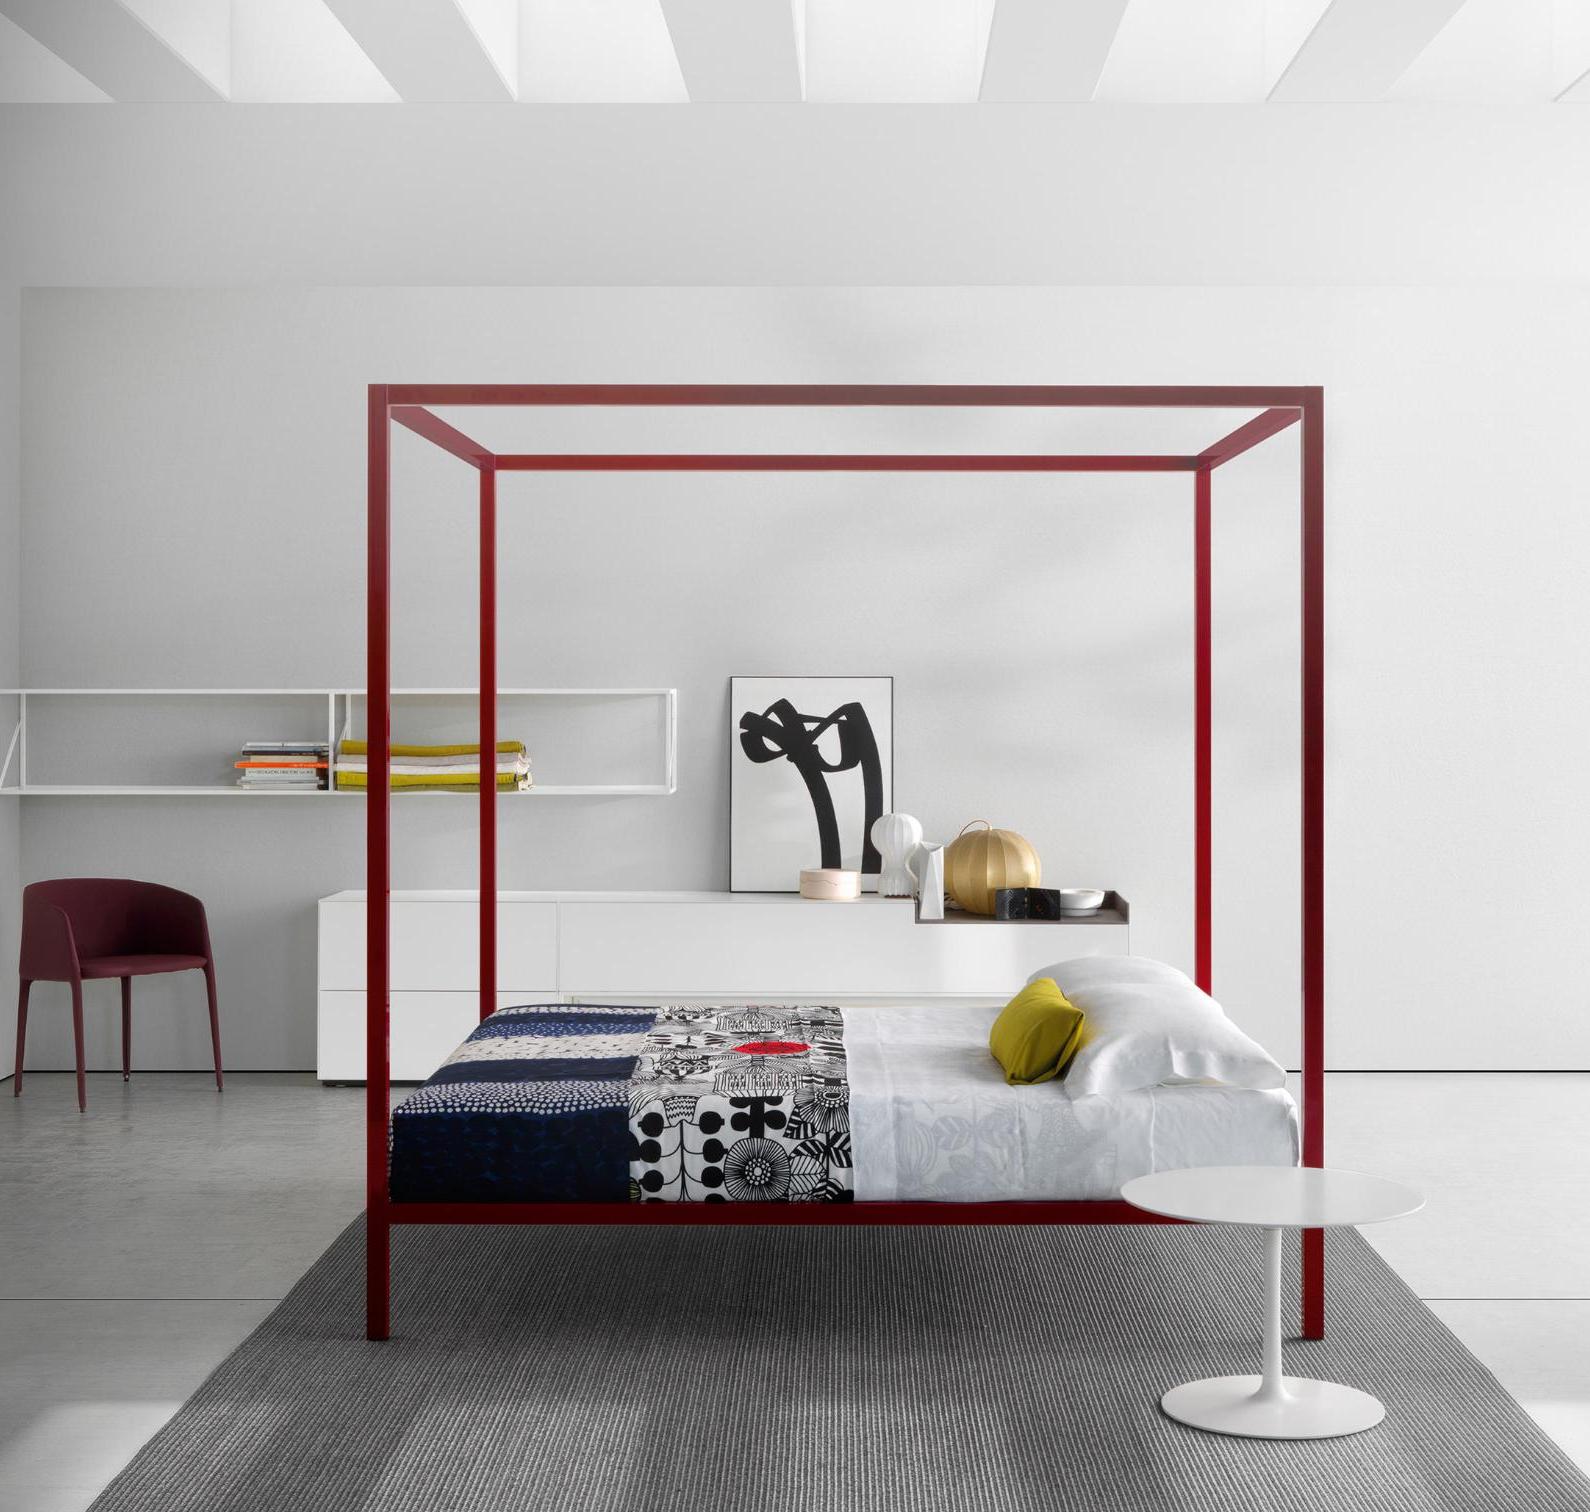 Aluminium Canopy Bed ☞ Structure: Gloss Painted White X060 ☞ Dimensions: 190 x 210 cm